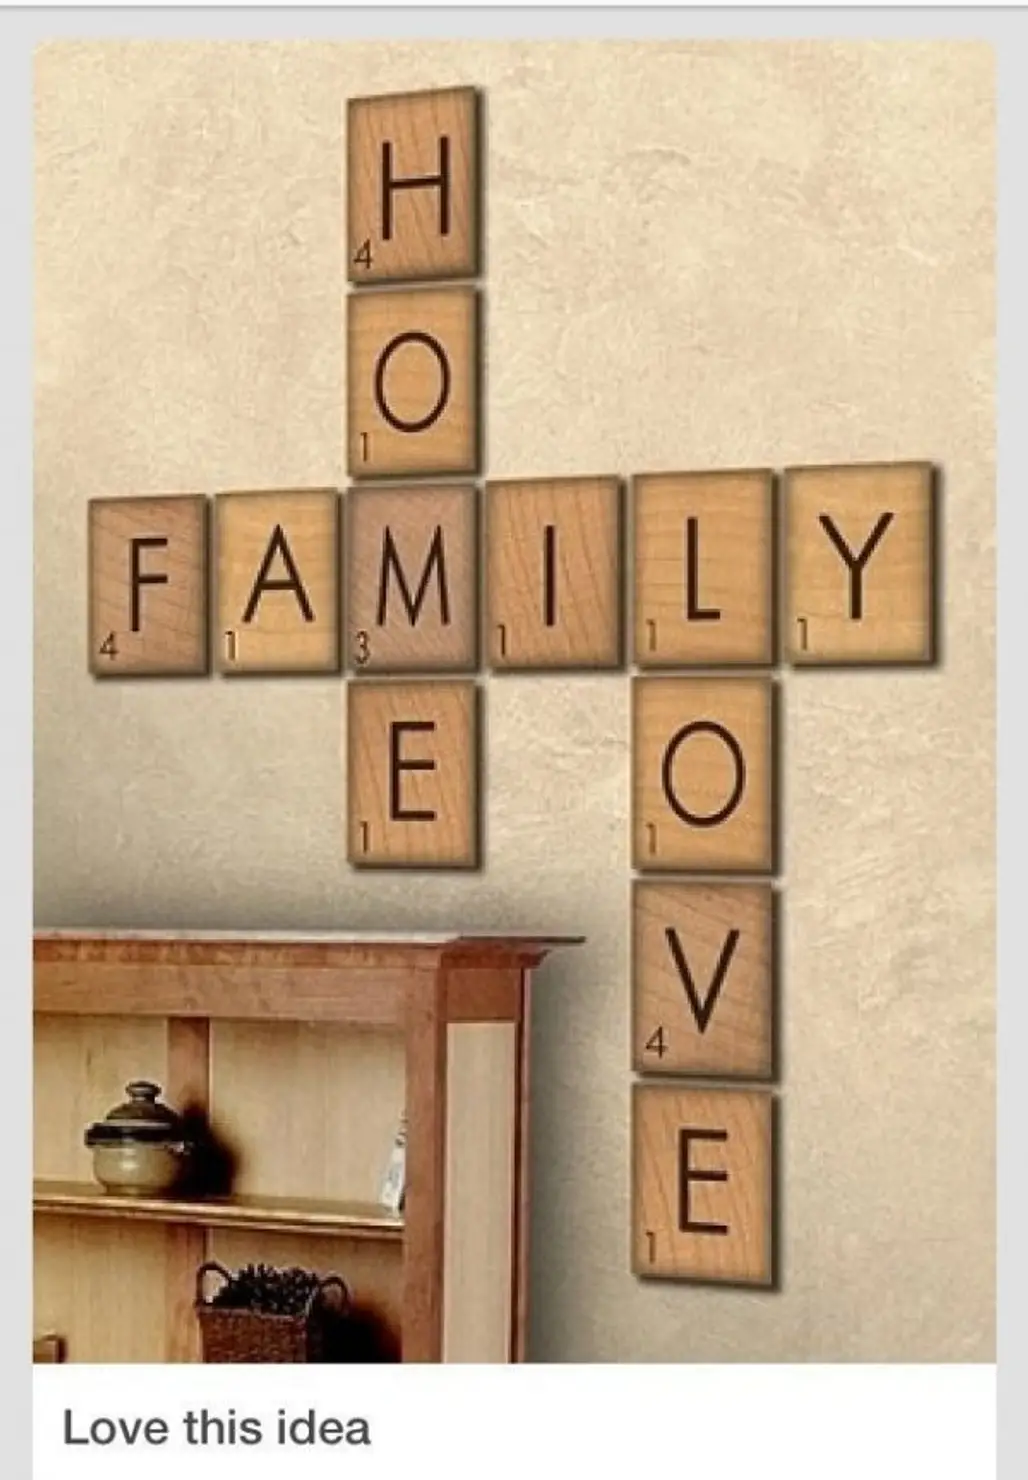 Show off Your Love of Scrabble